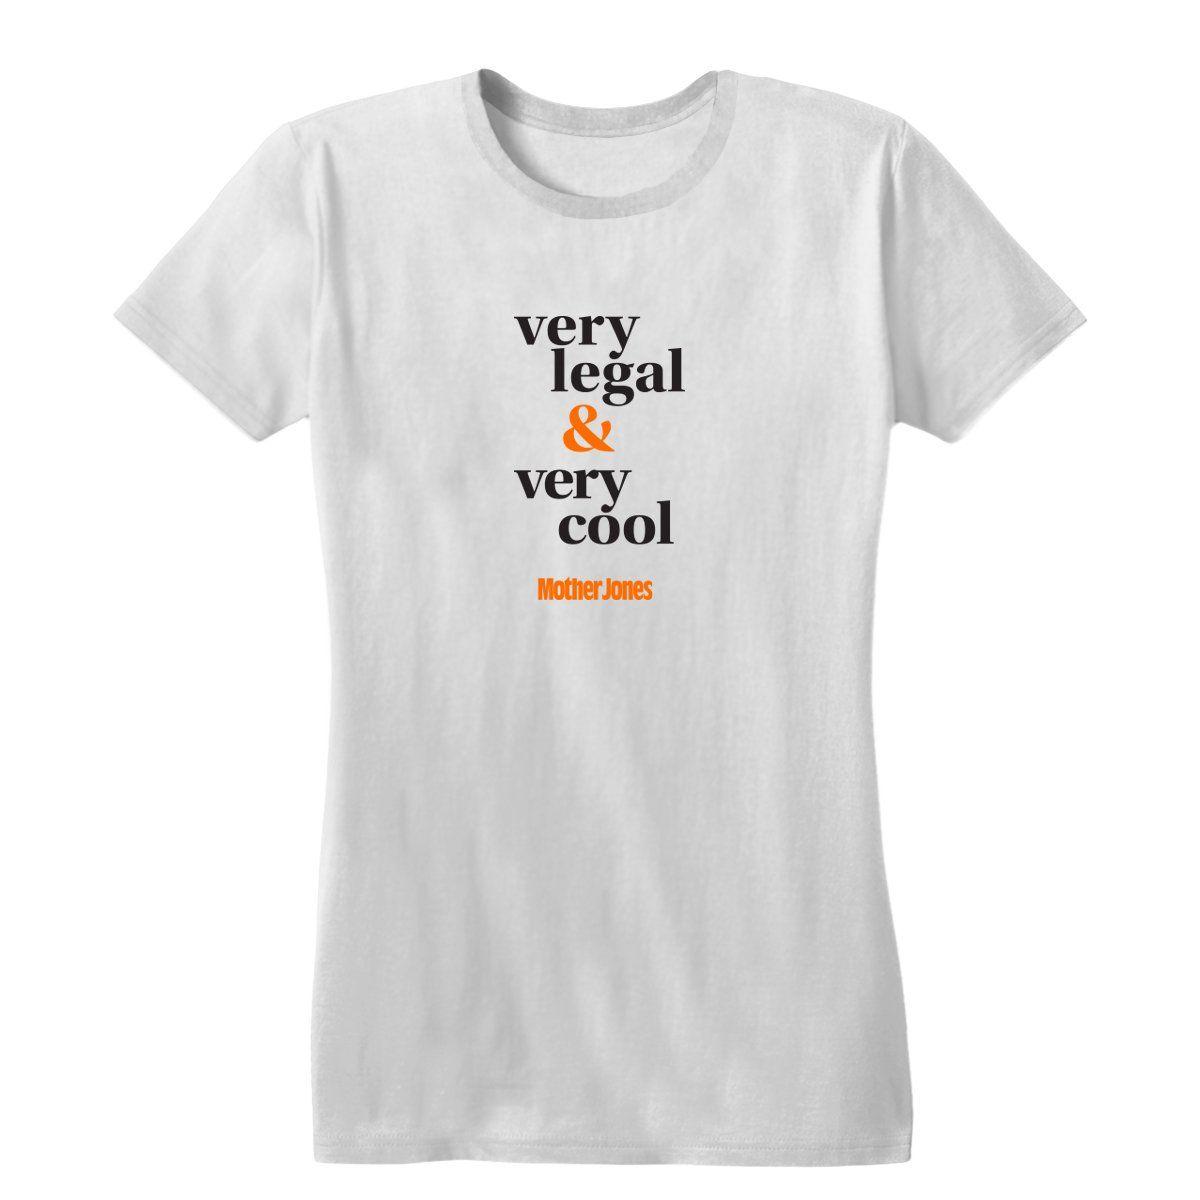 Cool T Logo - Very Legal & Very Cool Fitted Women's Tee - Mother Jones